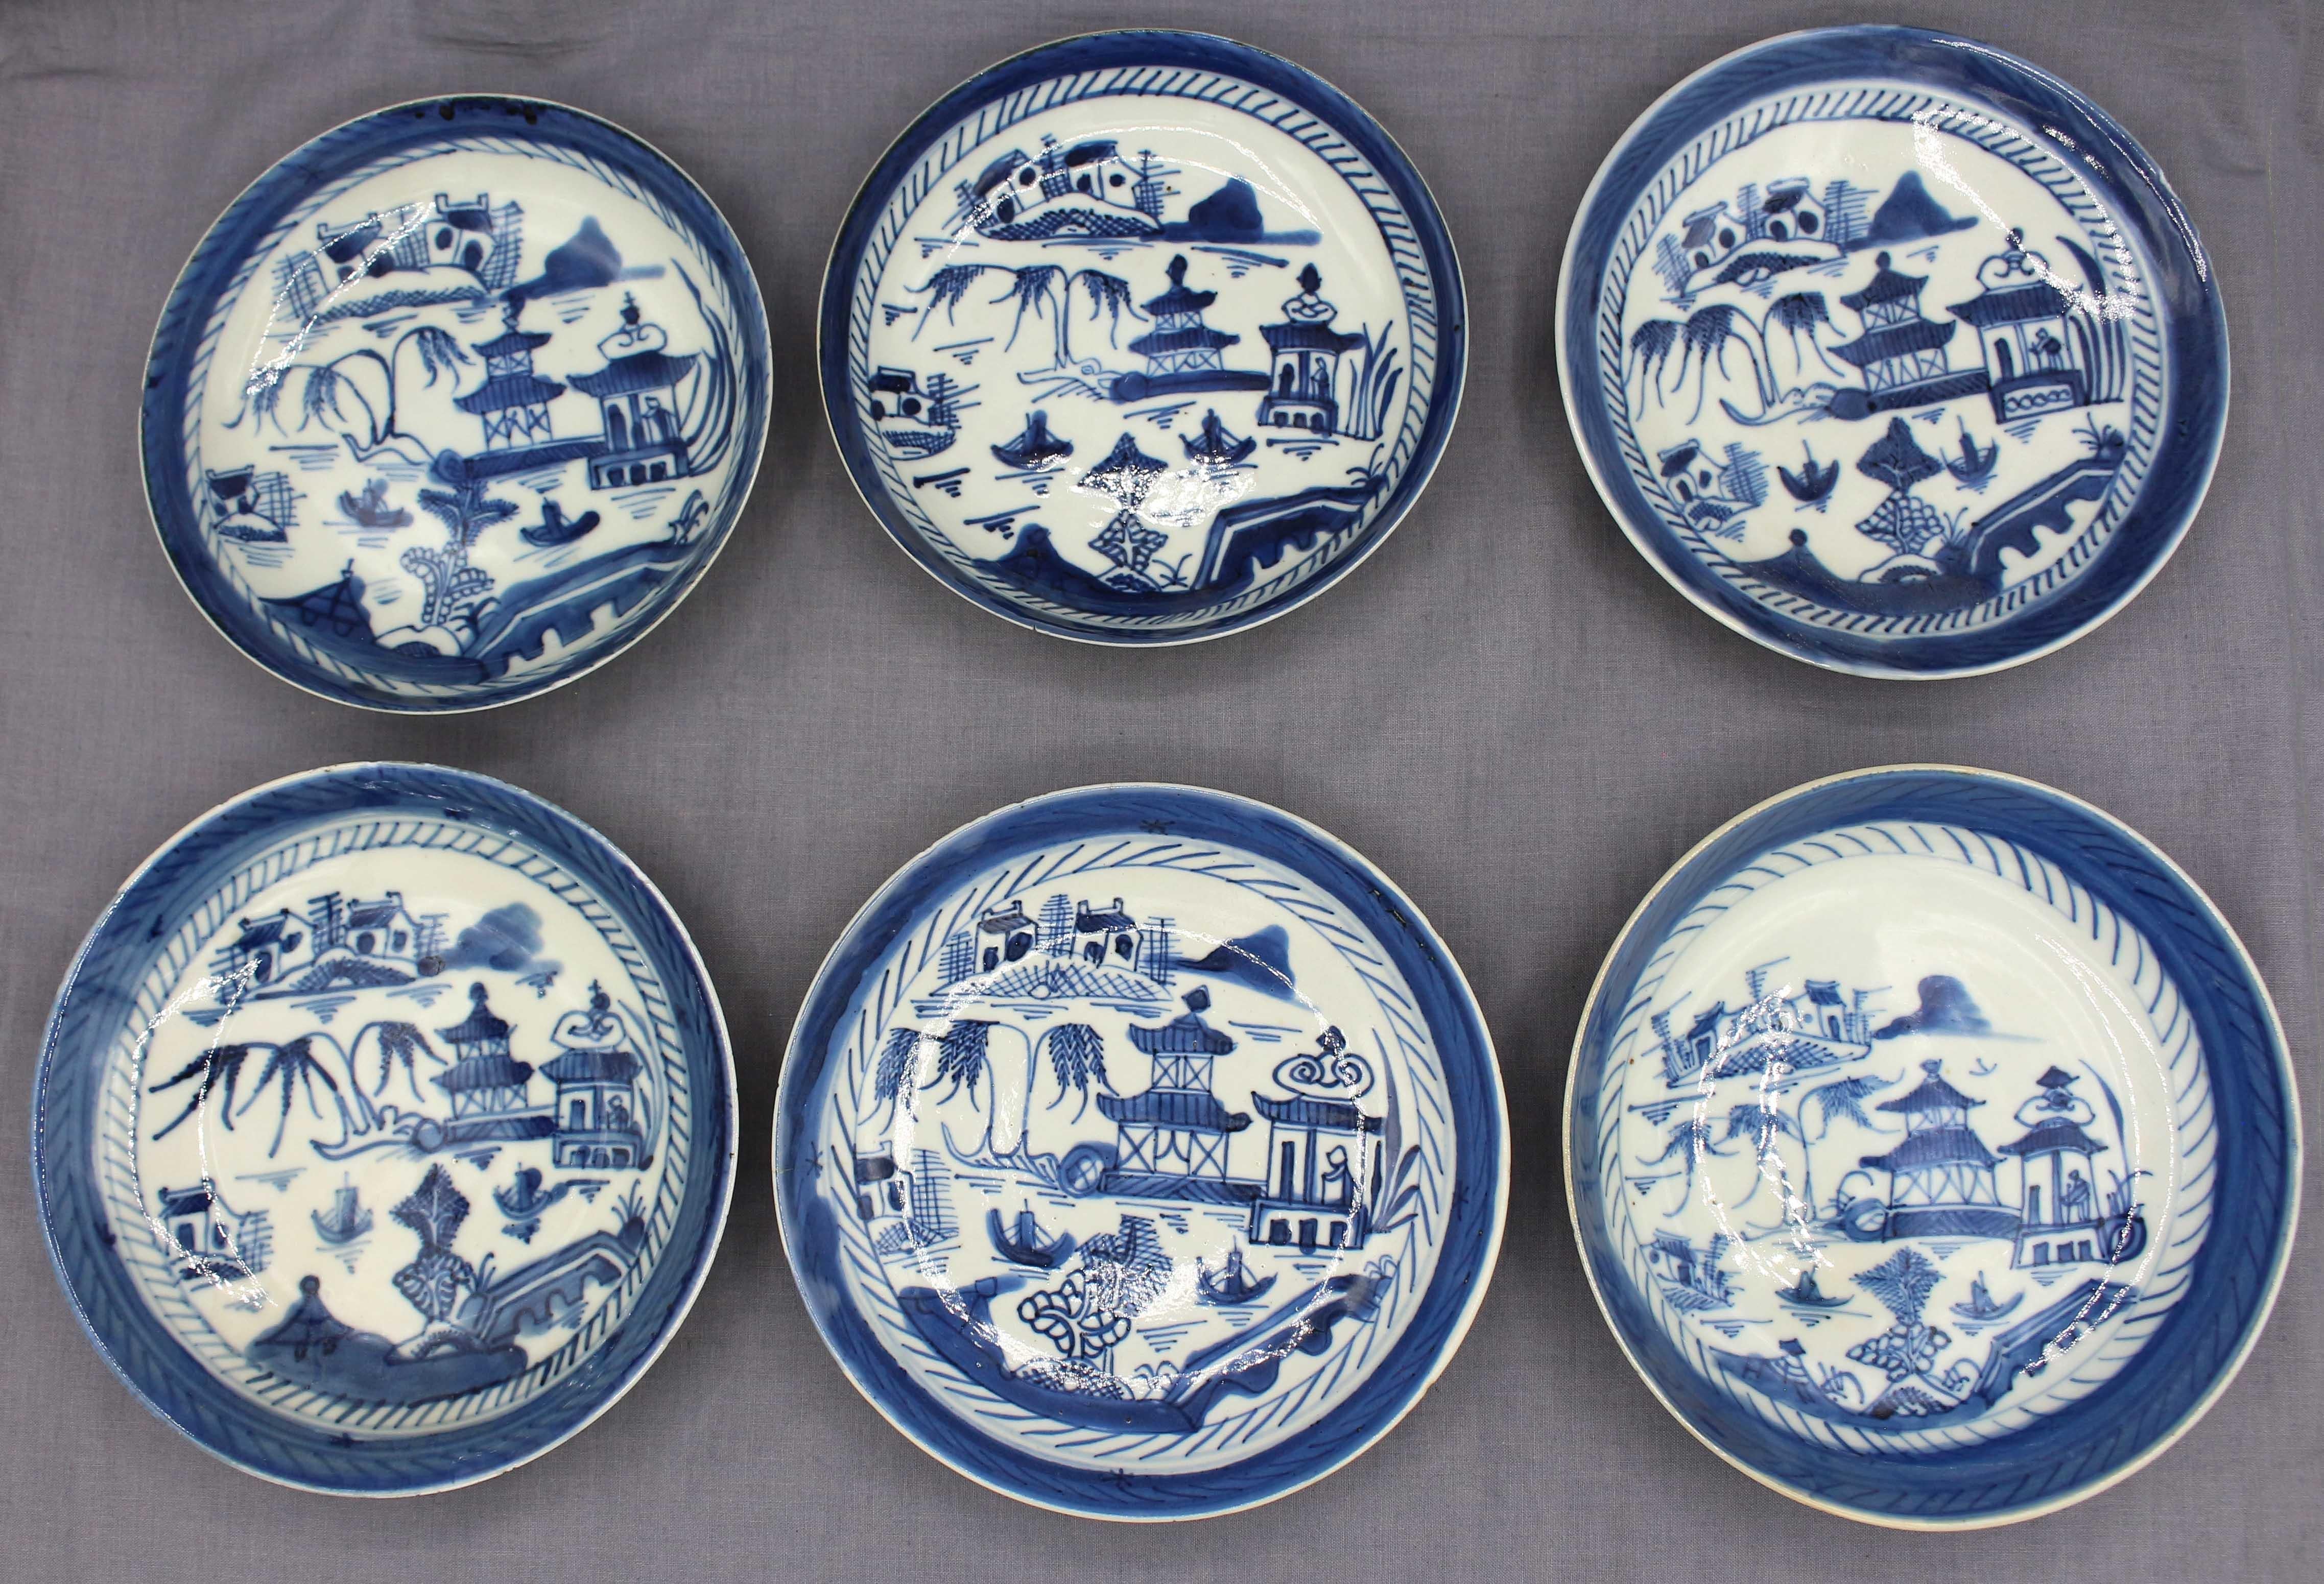 Circa 1800-1830 group of 6 Blue Canton porcelain low bowls, Chinese export. Ideal for fruits & desserts. Fine, thin potting. Rim nick or nicks to all but one; two with hairlines.
5 3/4